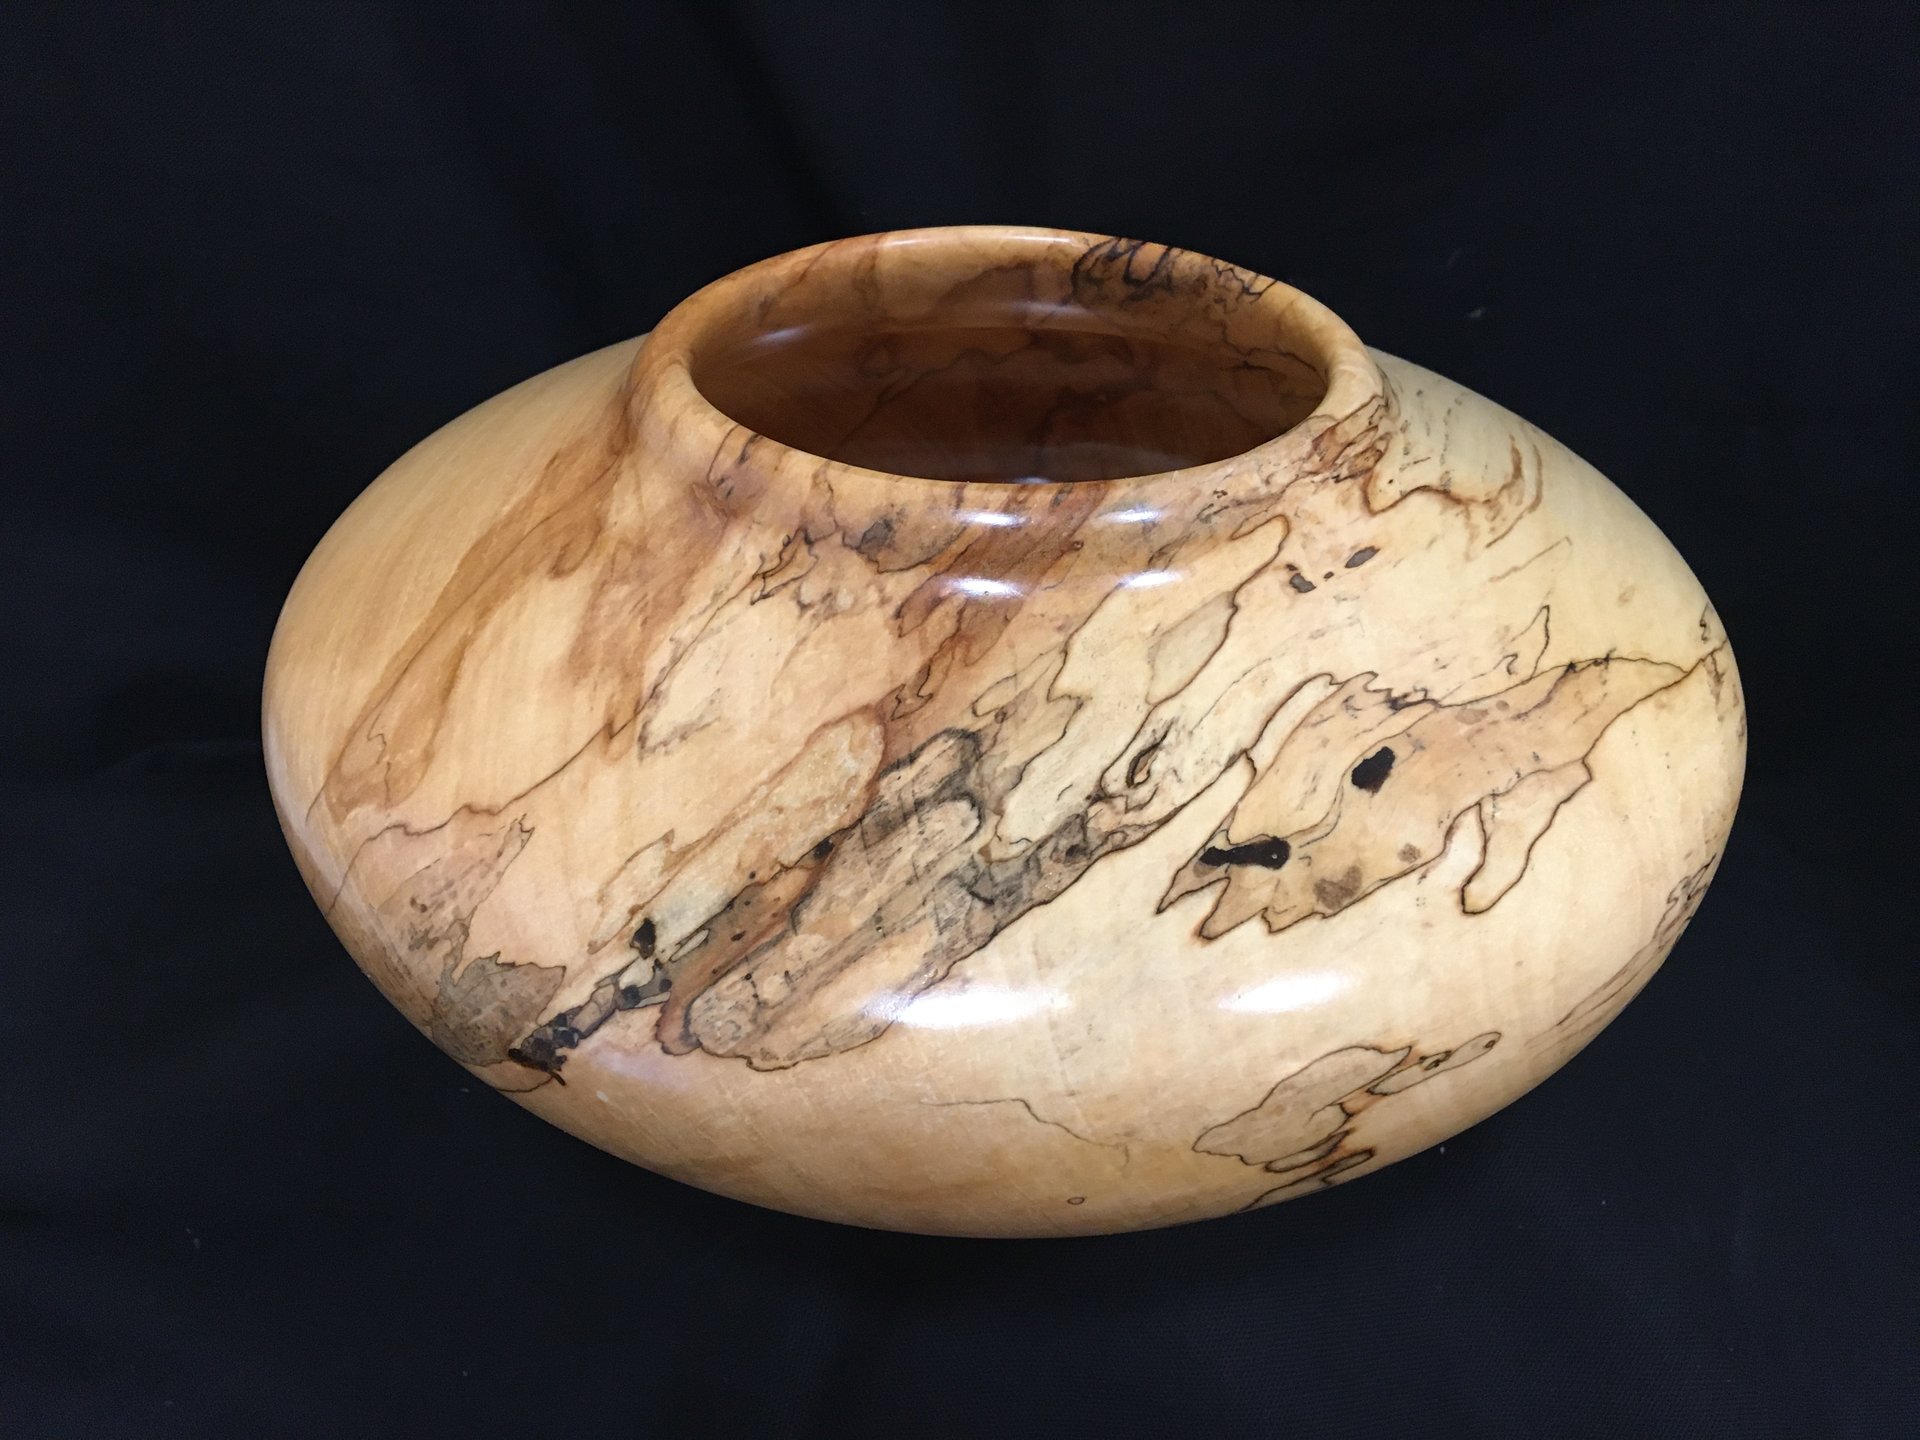 Spalted Ambrosia Maple